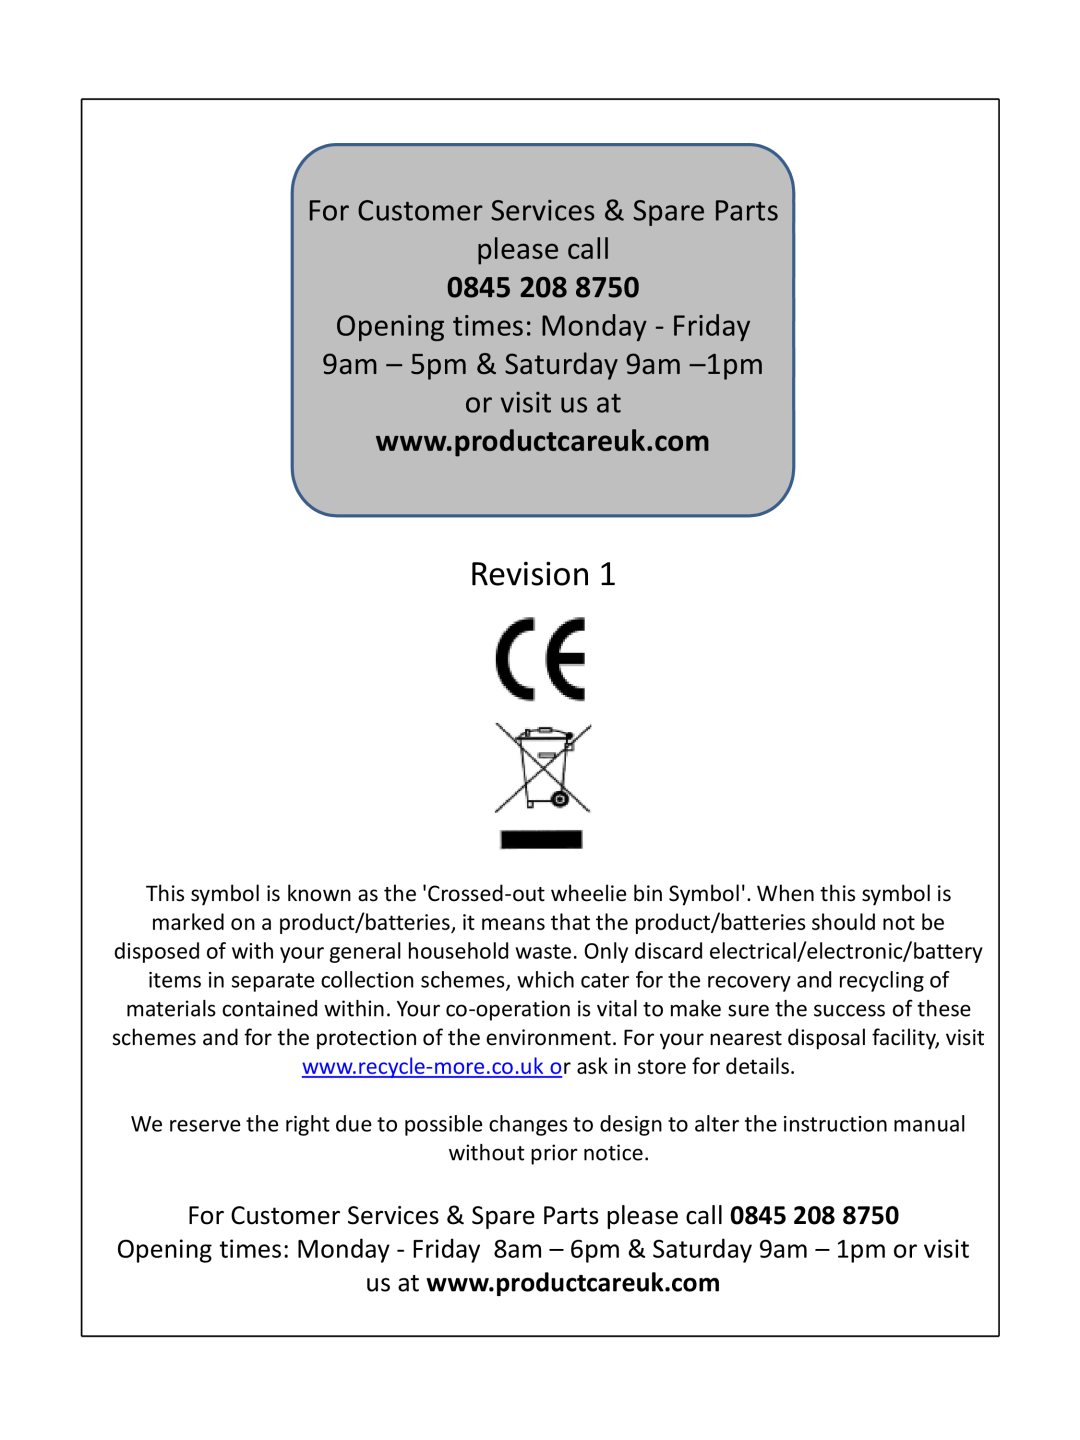 Russell Hobbs RHUCF55(B) instruction manual Revision, For Customer Services & Spare Parts please call, 0845 